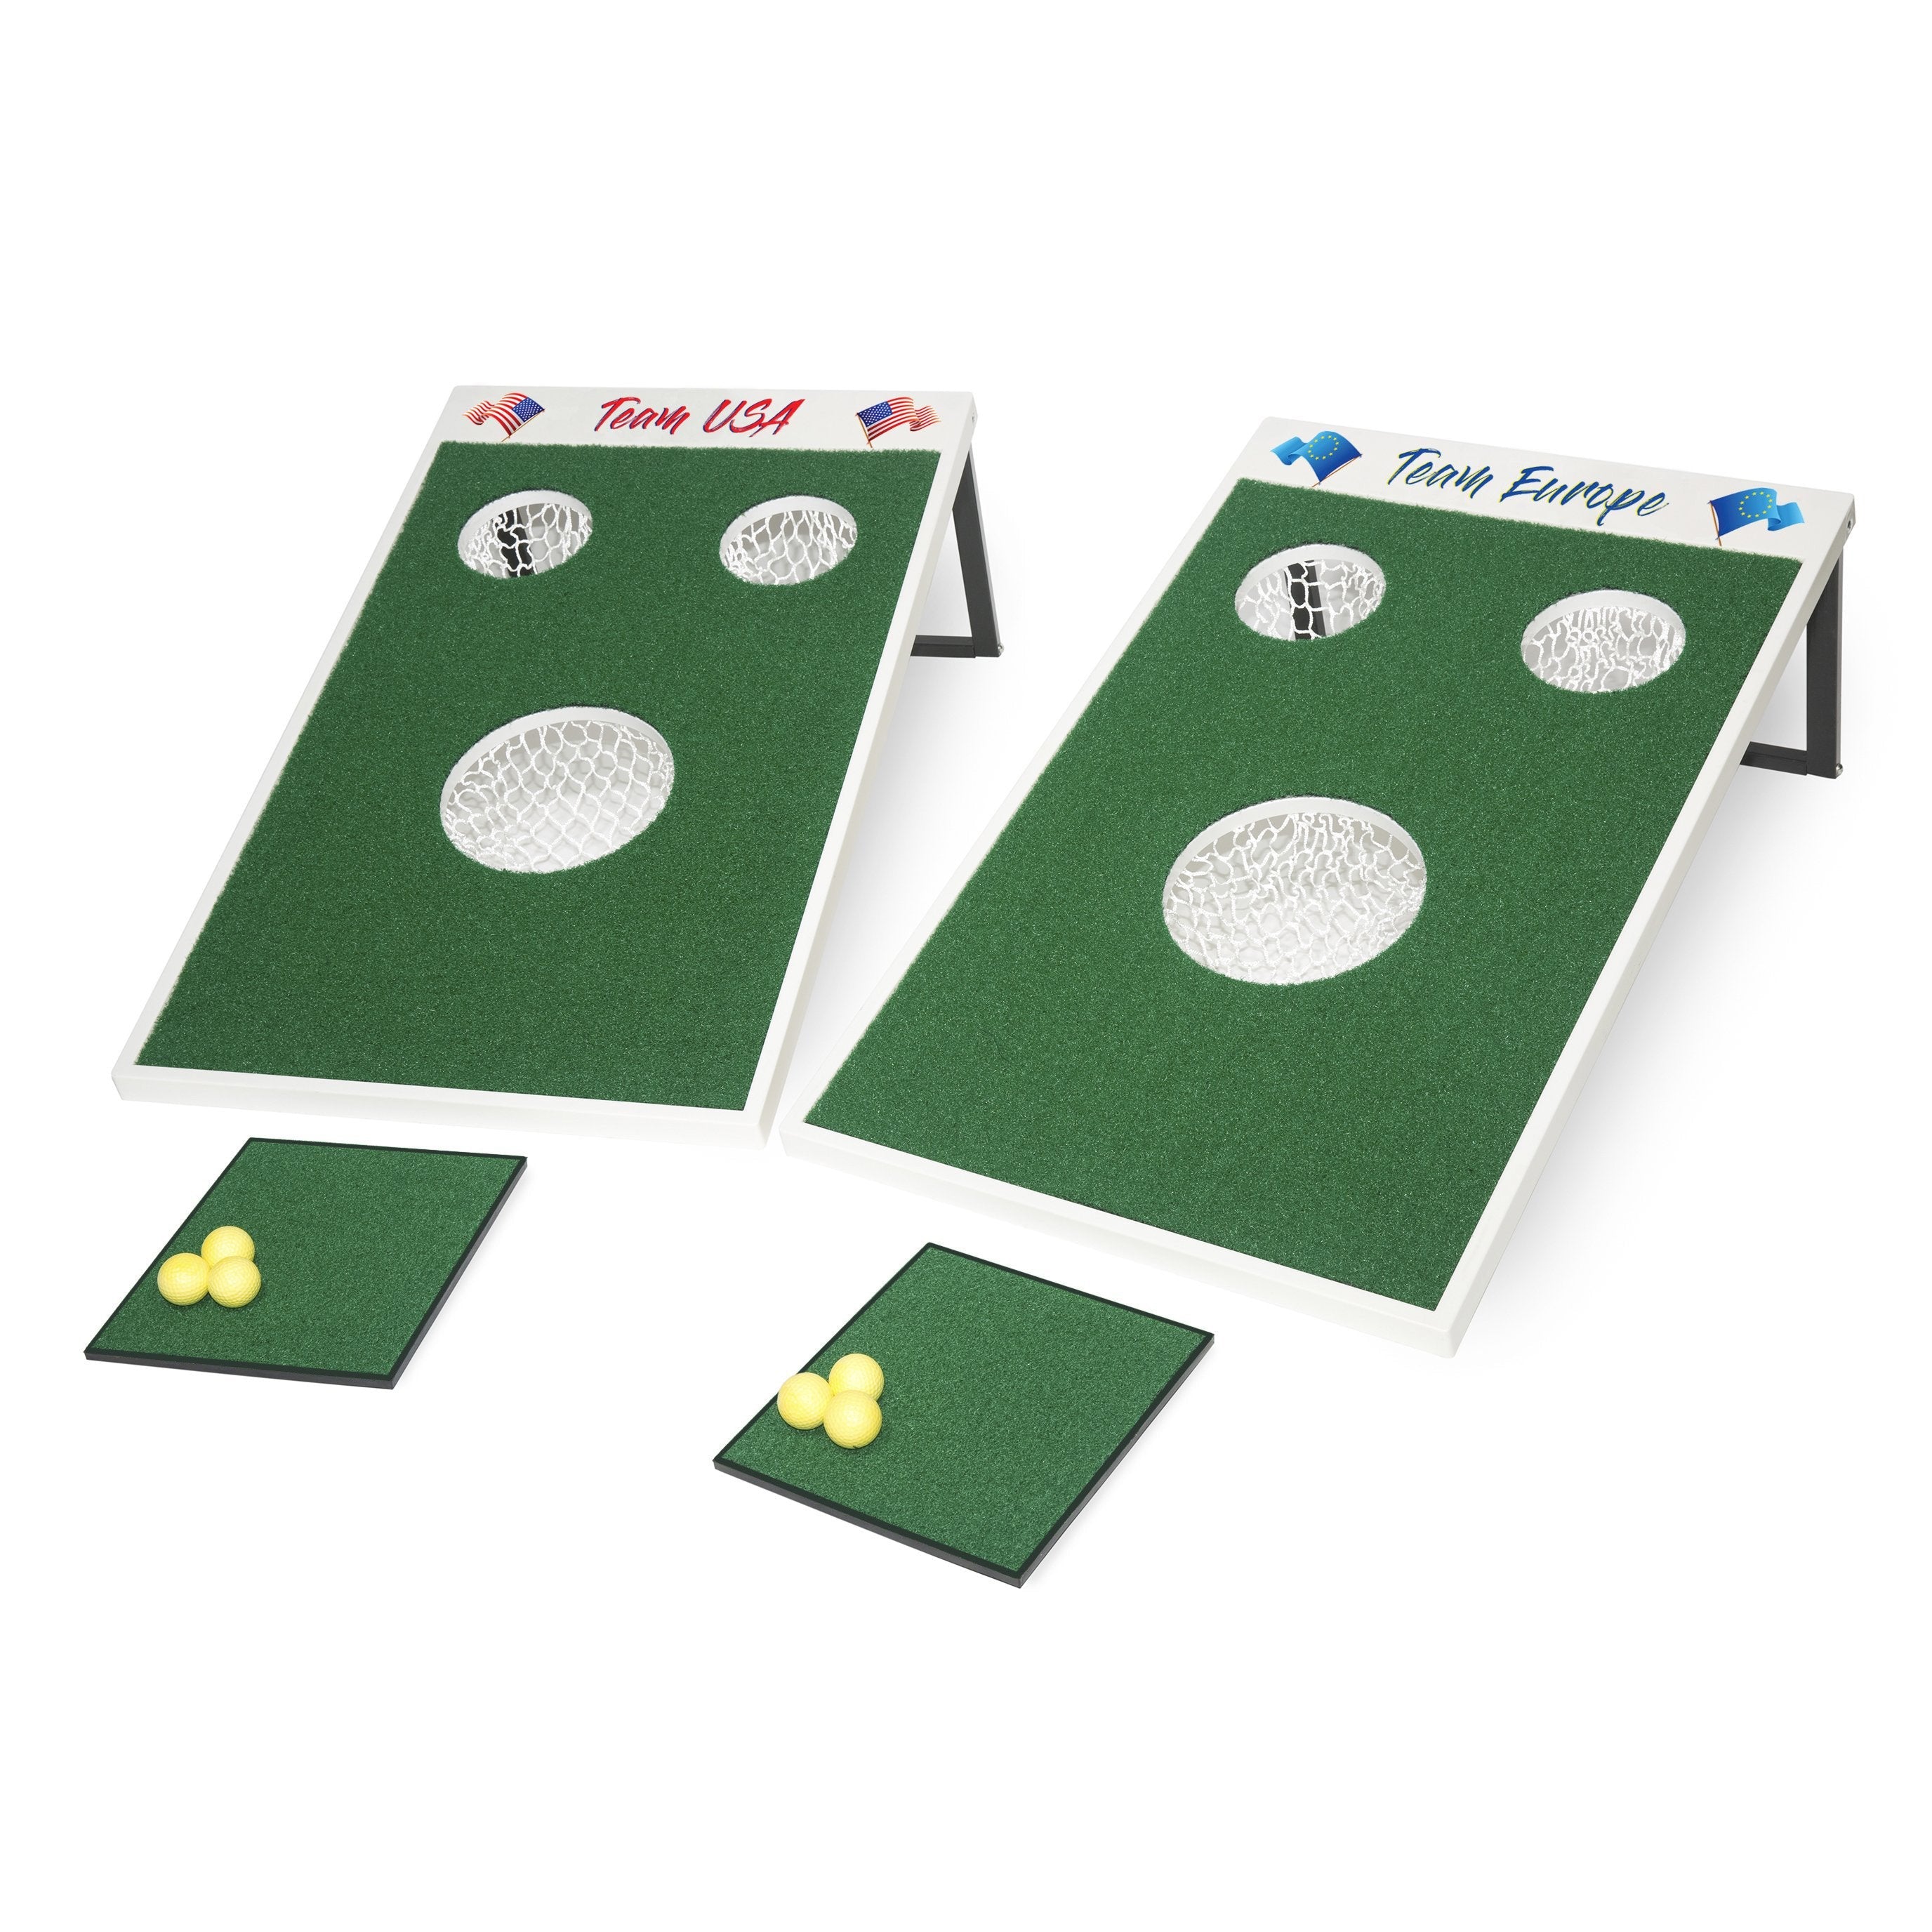 Chippo Golf USA vs. Europe Ryder Cup Edition Game Set